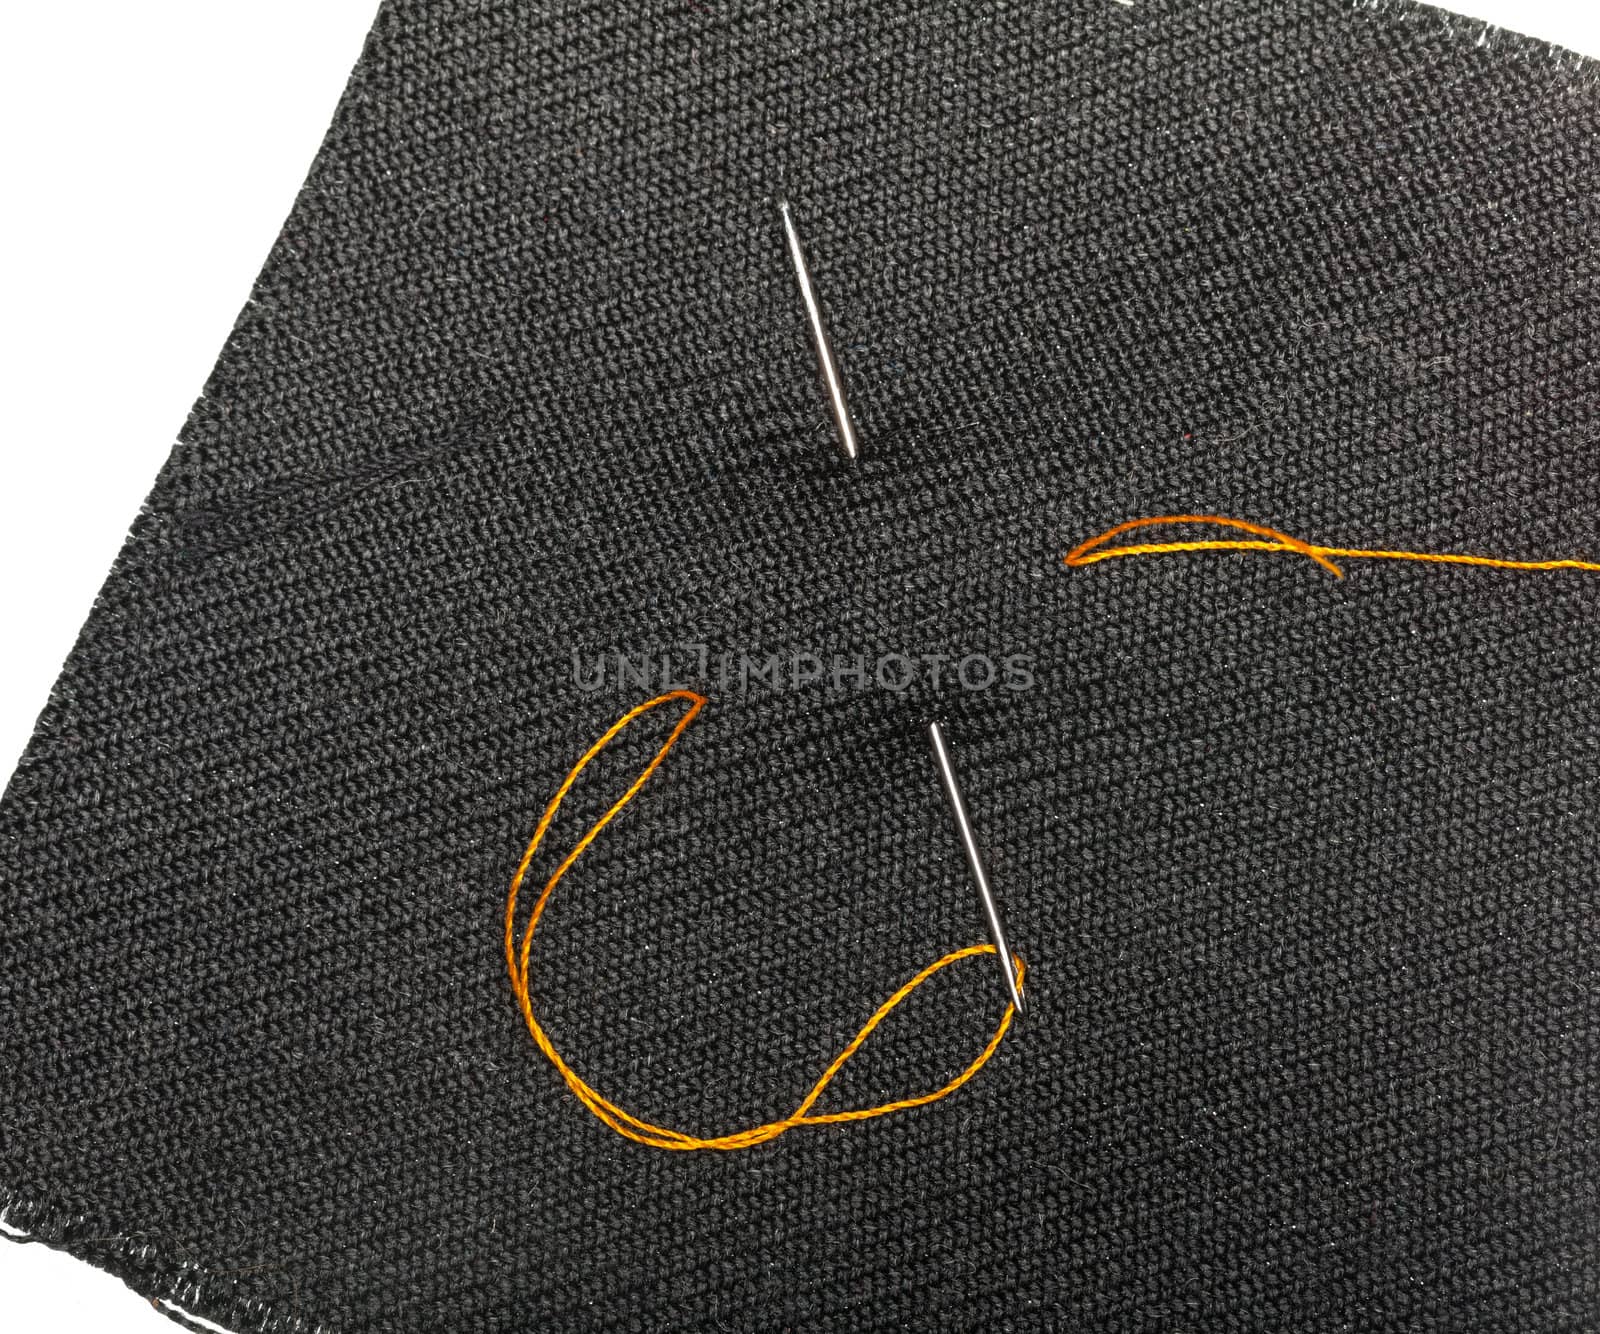 Orange thread and needle in black cloth by steheap